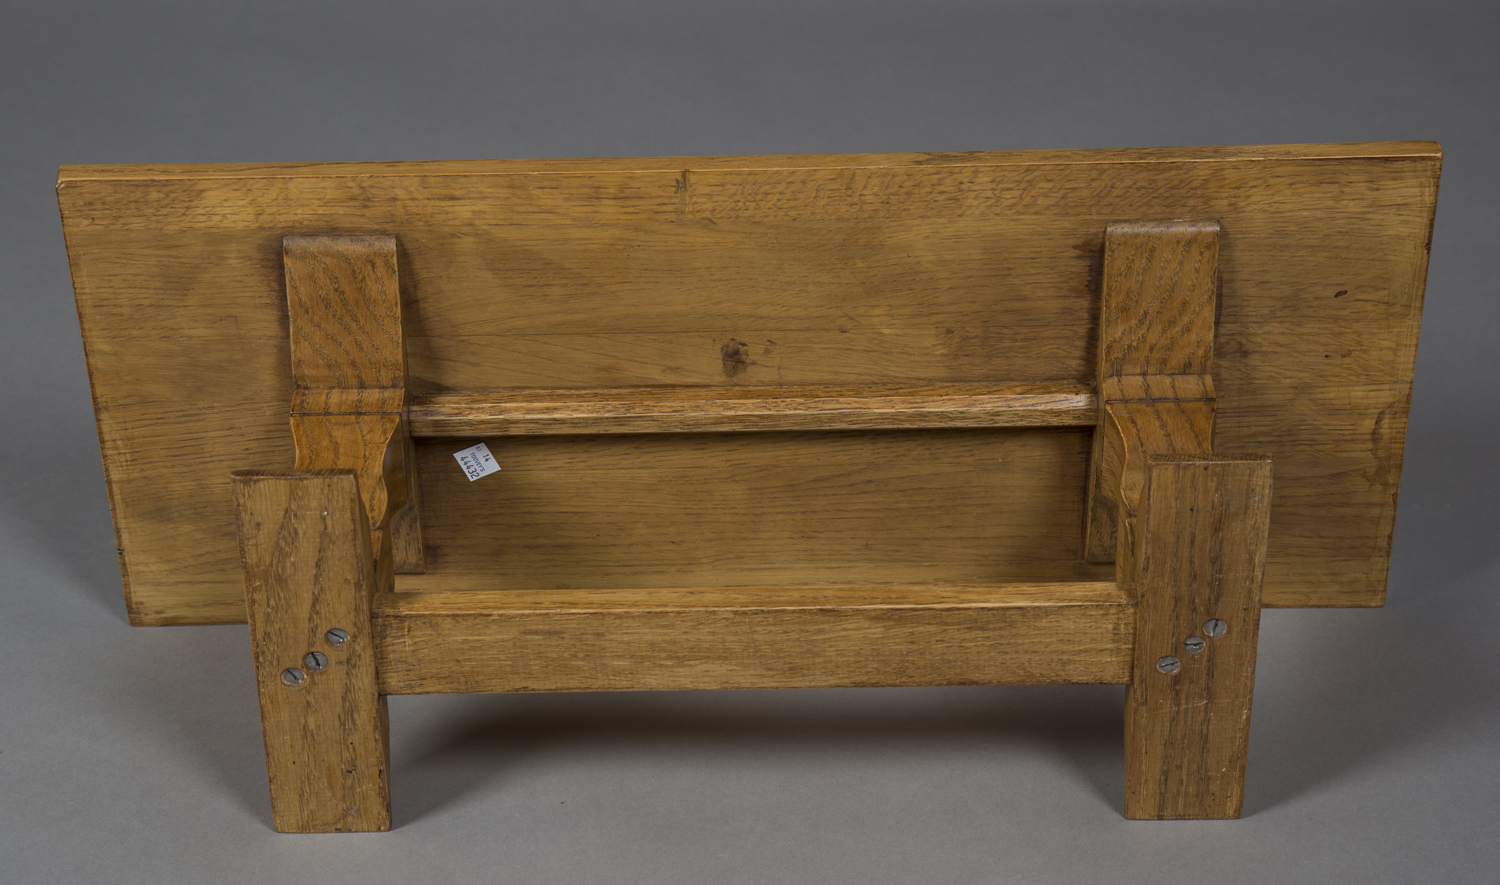 An early/mid-20th century Arts and Crafts style oak diminutive model of a refectory table, - Image 2 of 2